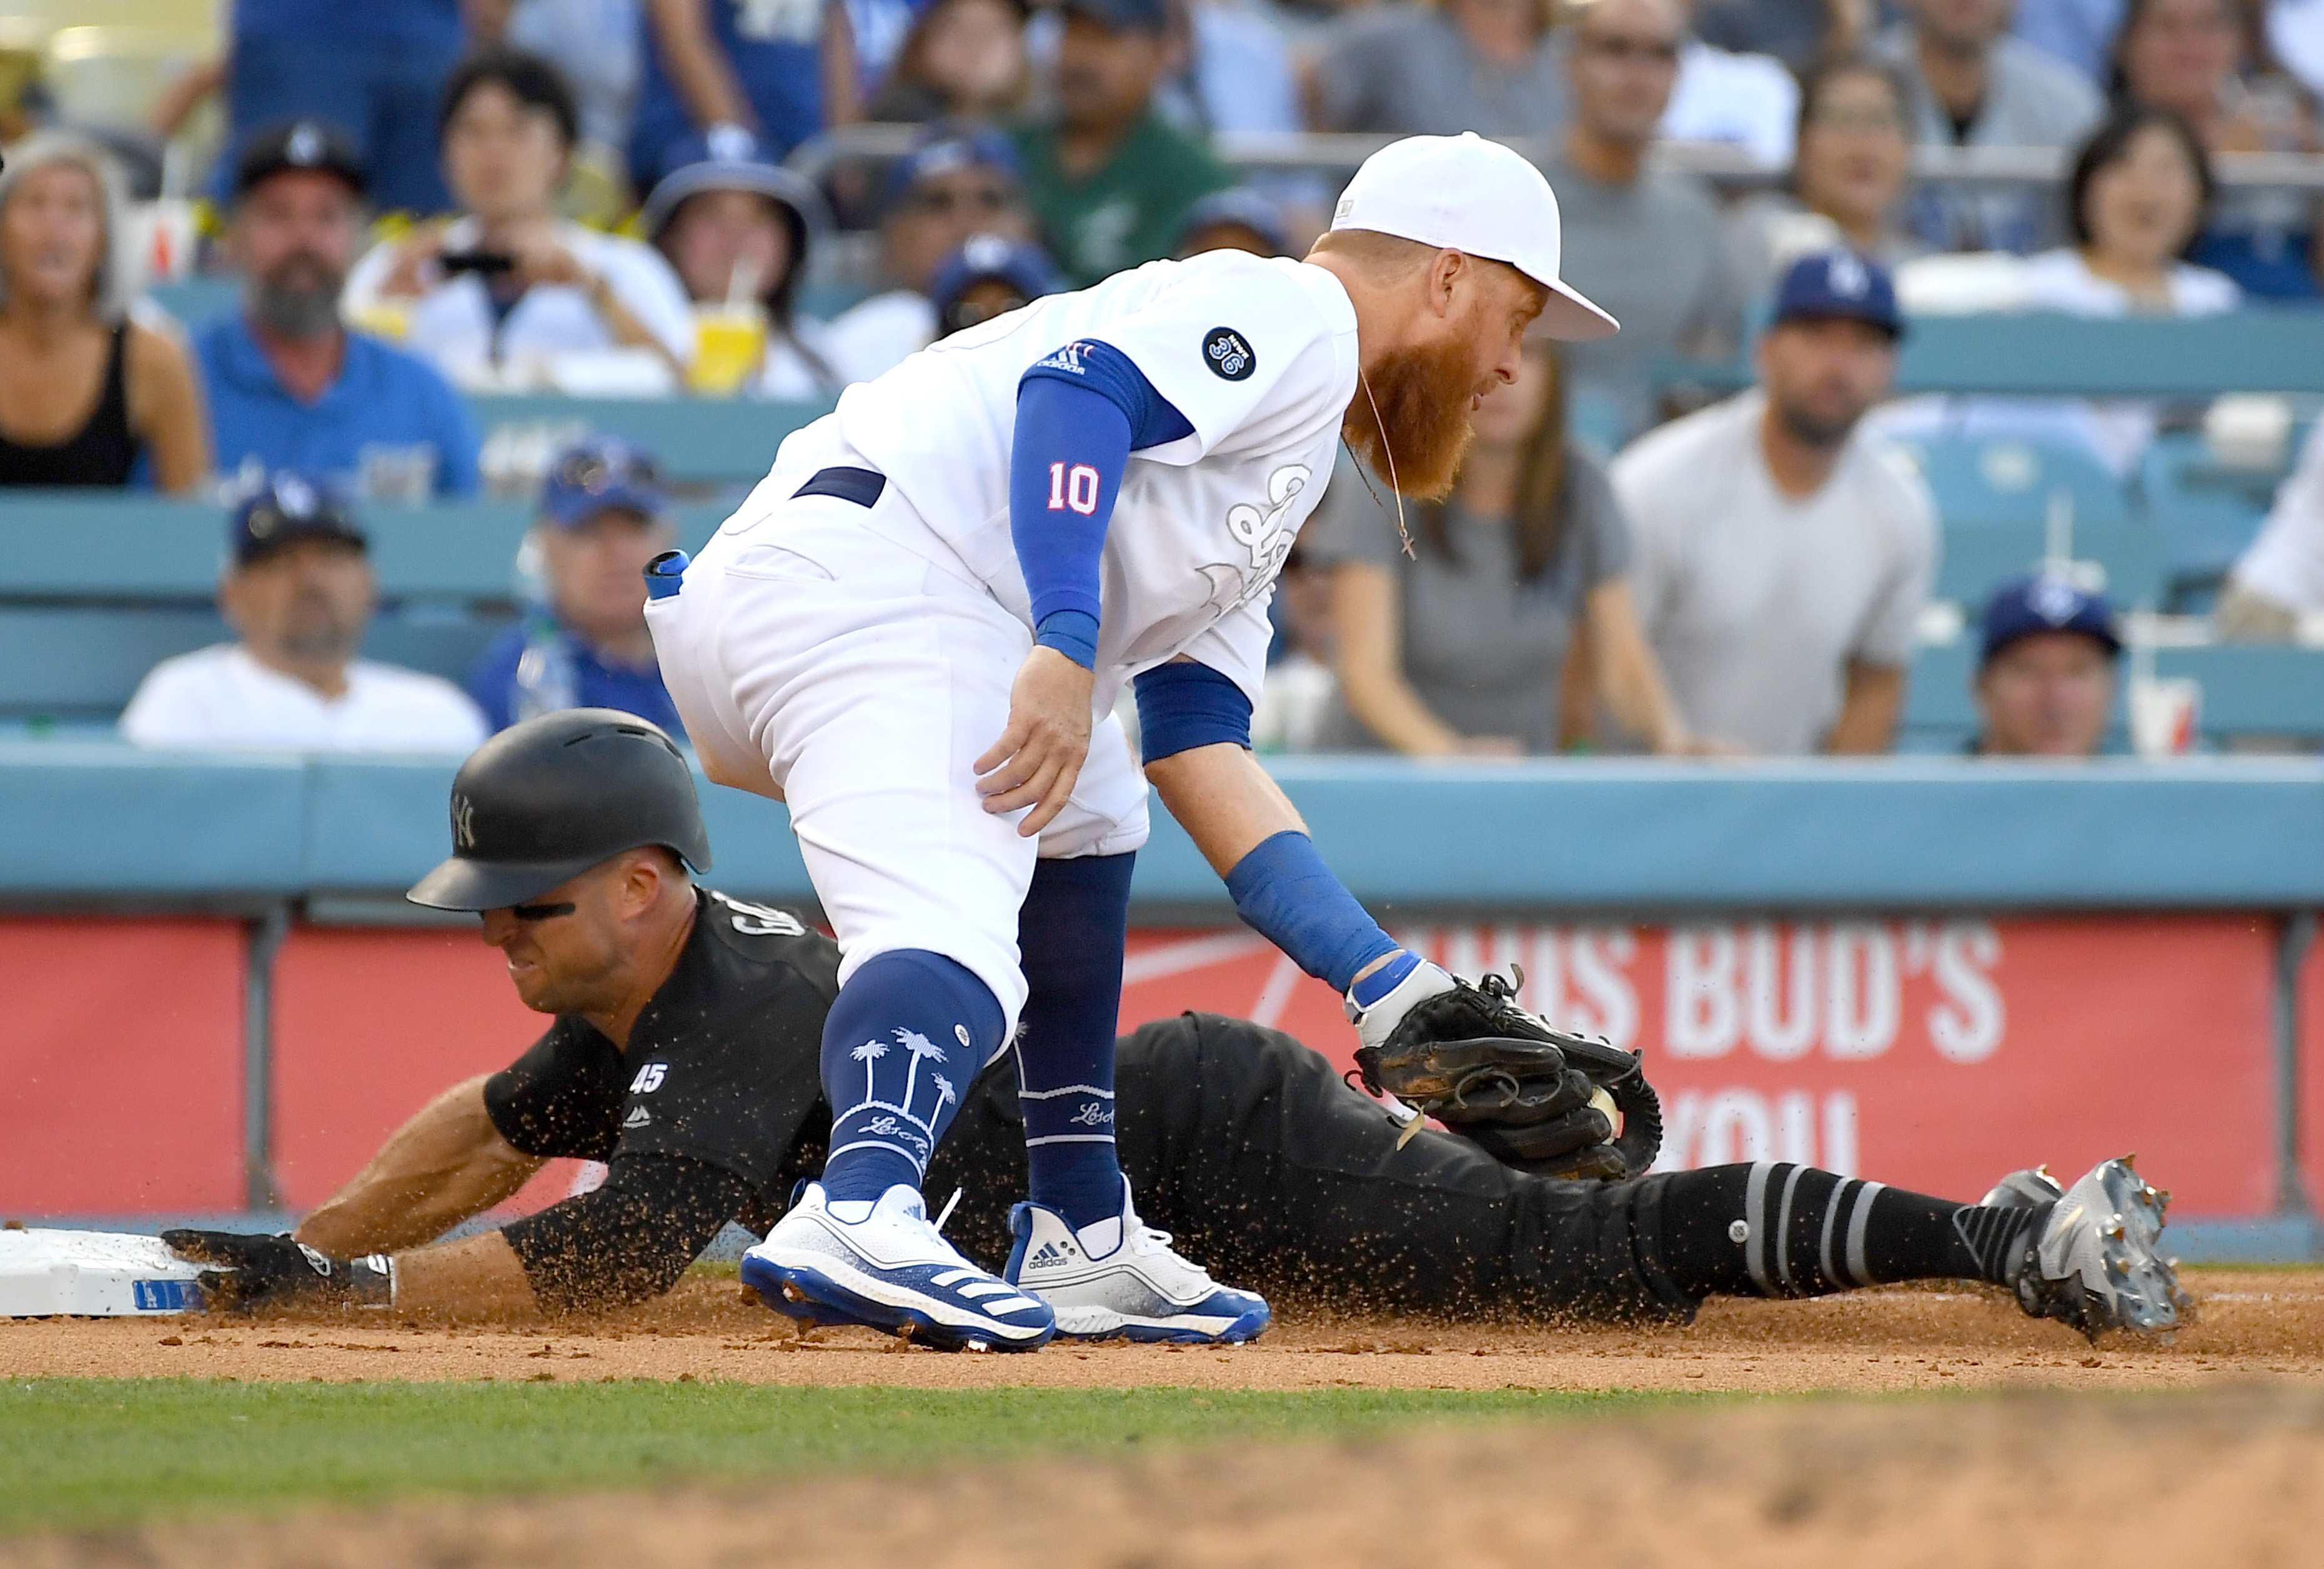 Yankees-Dodgers rivalry elicits thoughts past and future